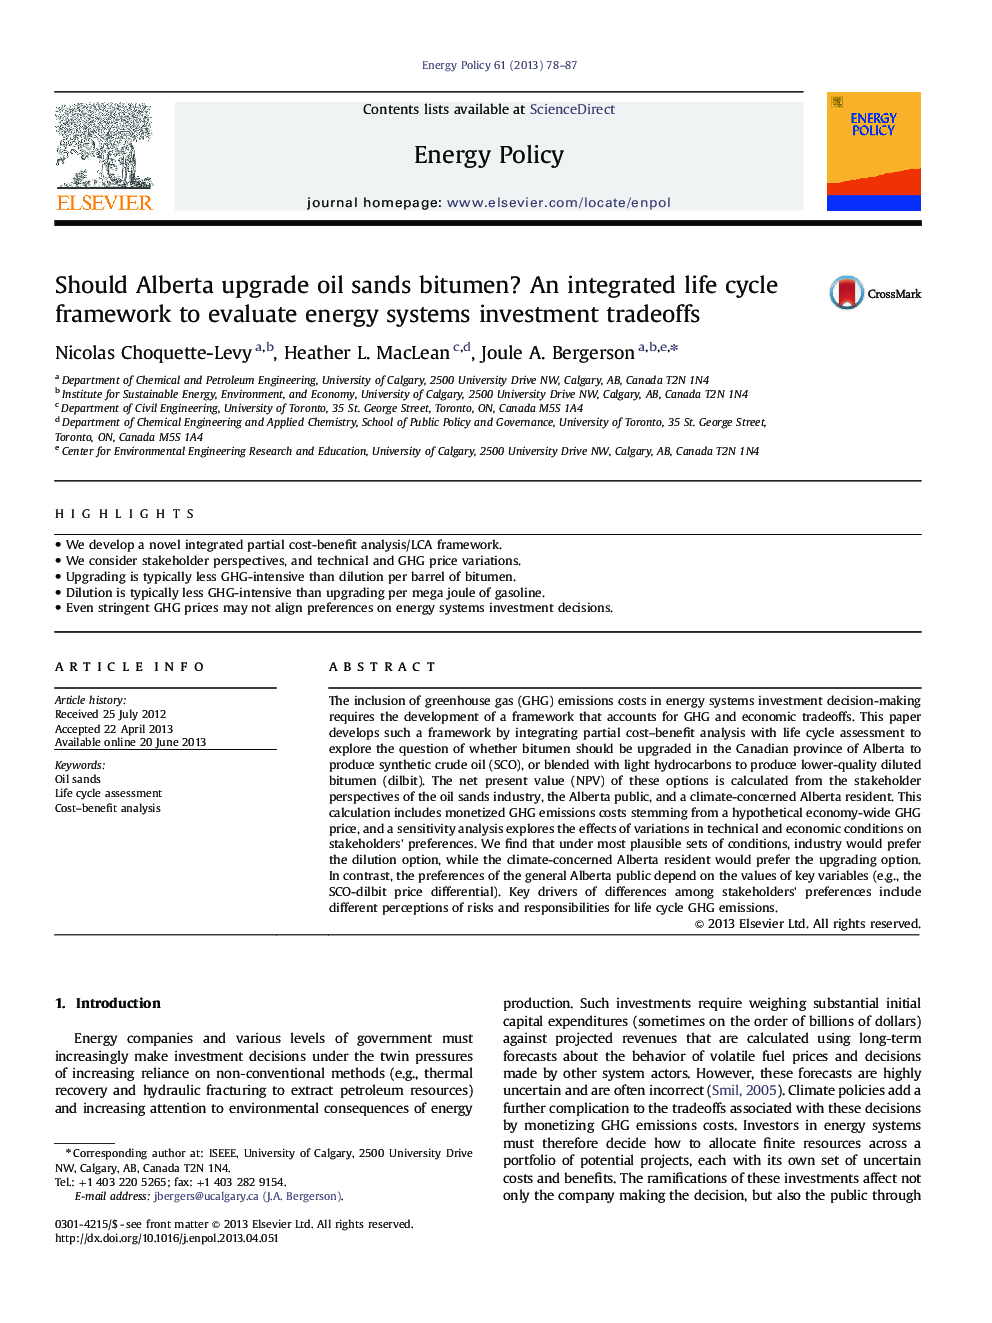 Should Alberta upgrade oil sands bitumen? An integrated life cycle framework to evaluate energy systems investment tradeoffs